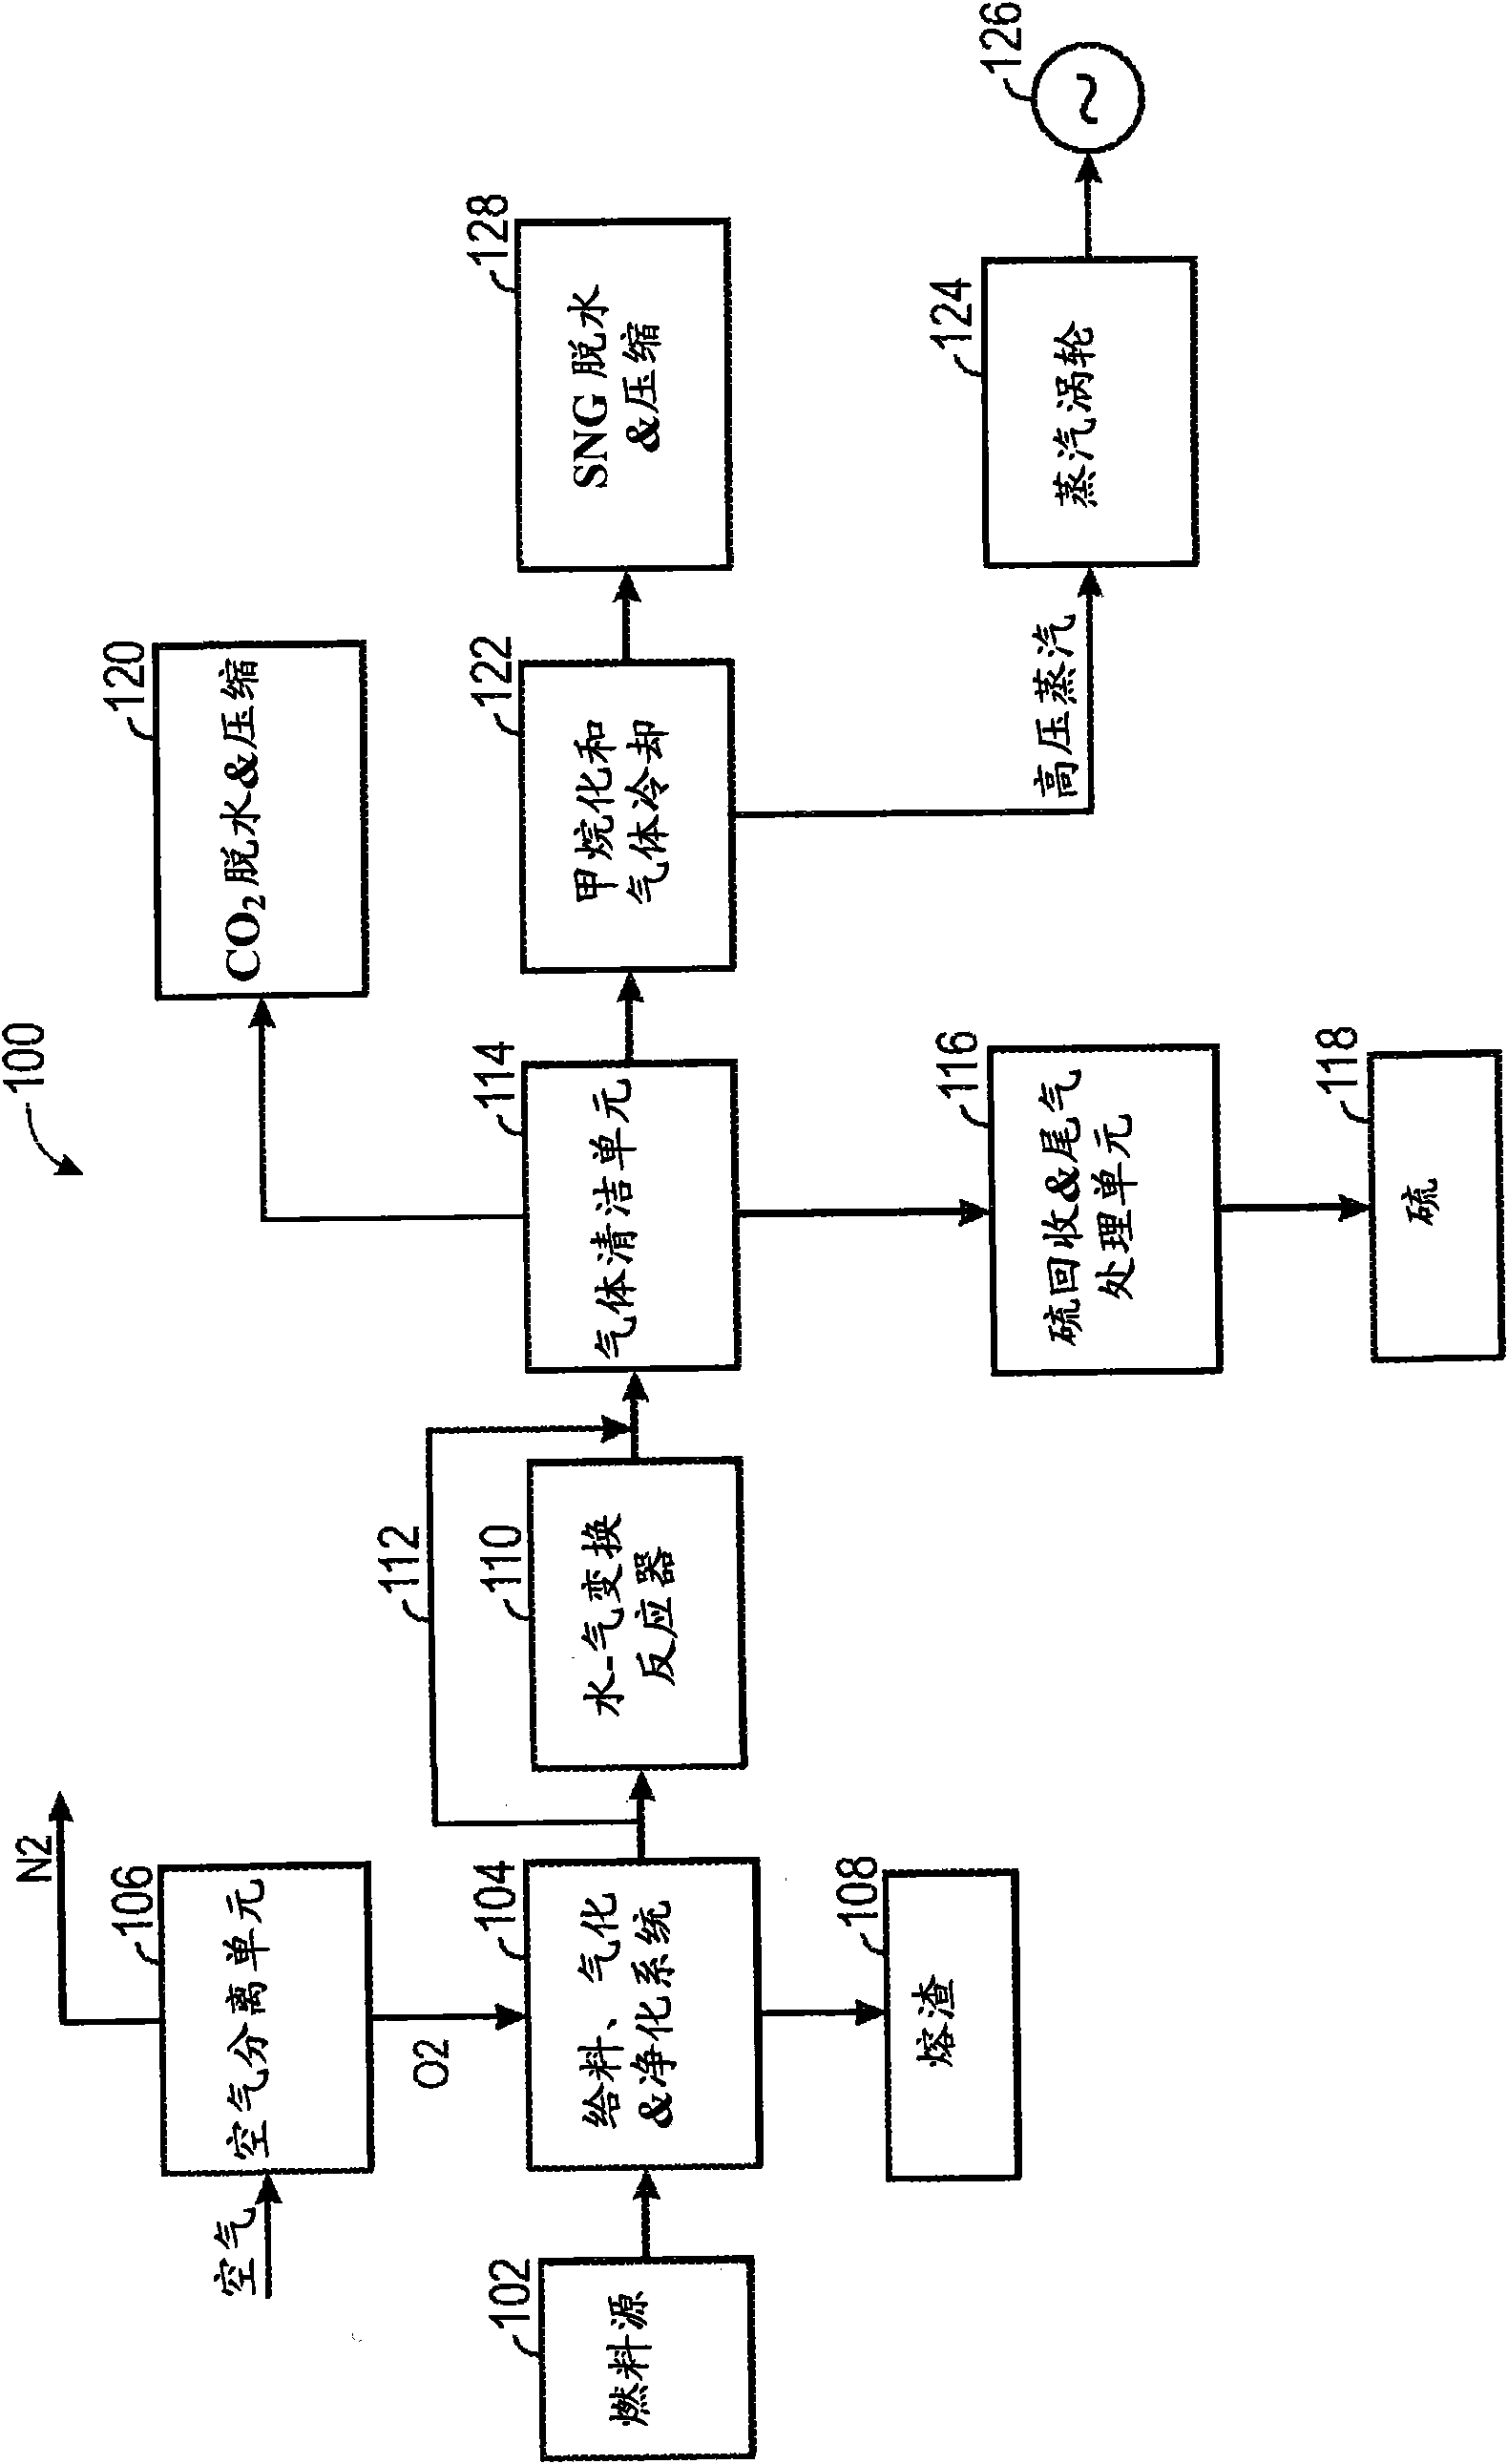 Method and apparatus for substitute natural gas generation